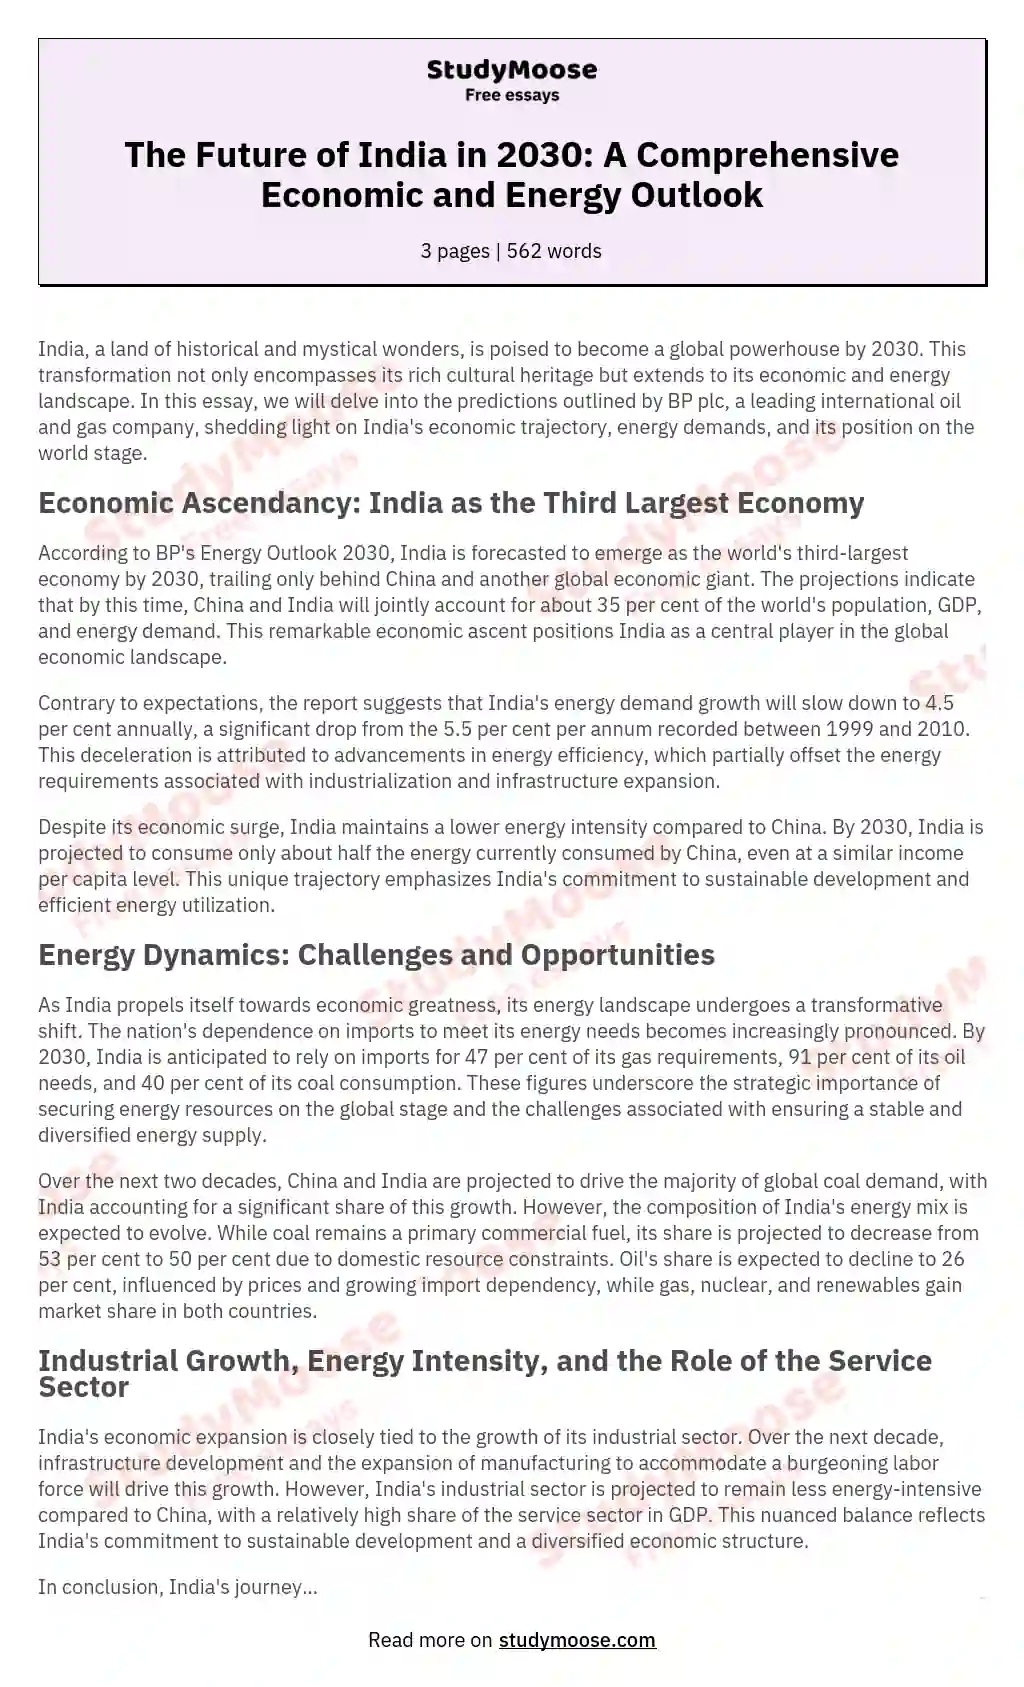 The Future of India in 2030: A Comprehensive Economic and Energy Outlook essay